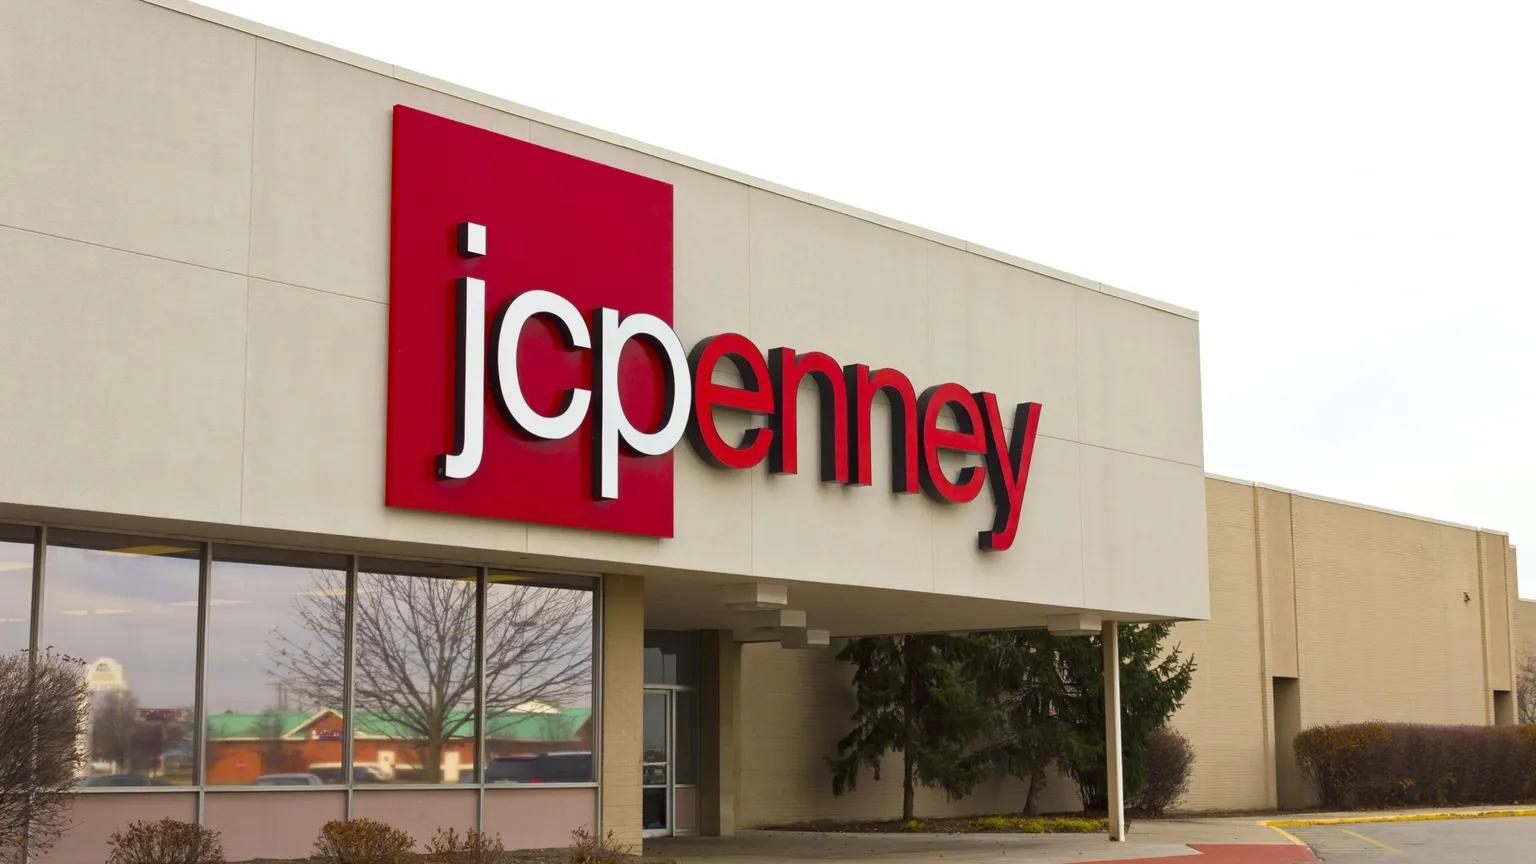 A JC Penney retail store in Indianapolis in 2015. Image: Jonathan Weiss/Shutterstock